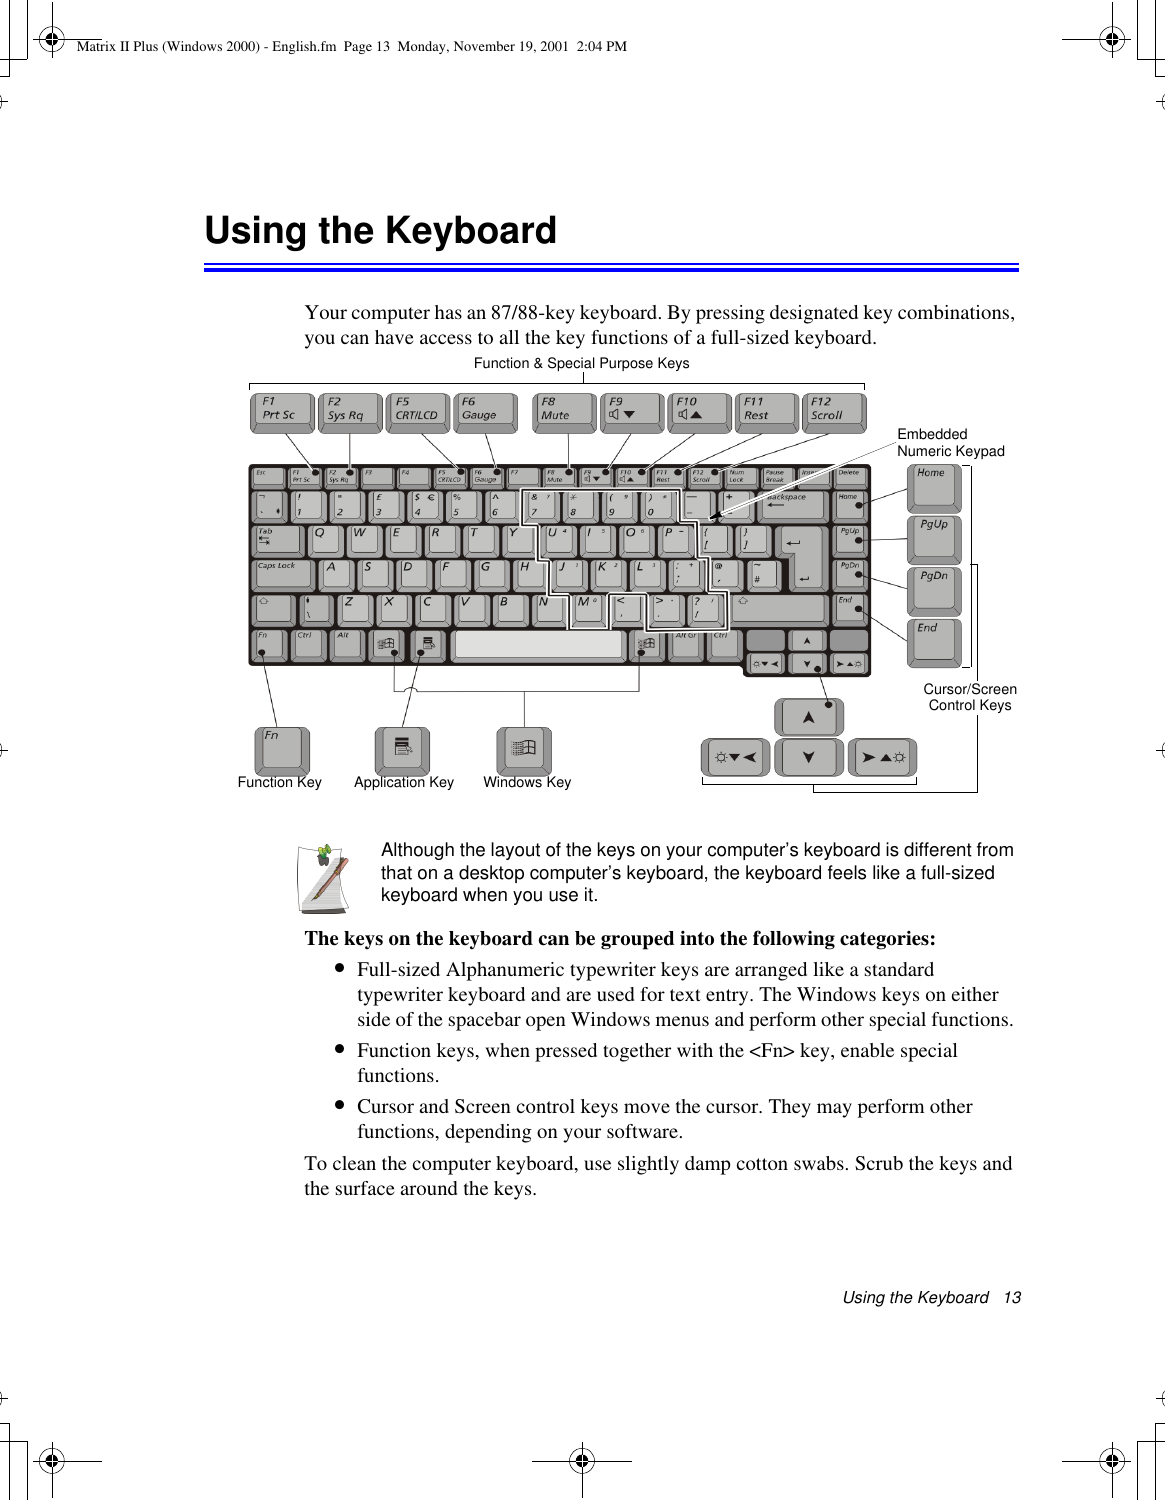 Using the Keyboard   13Using the KeyboardYour computer has an 87/88-key keyboard. By pressing designated key combinations, you can have access to all the key functions of a full-sized keyboard. Although the layout of the keys on your computer’s keyboard is different from that on a desktop computer’s keyboard, the keyboard feels like a full-sized keyboard when you use it. The keys on the keyboard can be grouped into the following categories:•Full-sized Alphanumeric typewriter keys are arranged like a standard typewriter keyboard and are used for text entry. The Windows keys on either side of the spacebar open Windows menus and perform other special functions. •Function keys, when pressed together with the &lt;Fn&gt; key, enable special functions.•Cursor and Screen control keys move the cursor. They may perform other functions, depending on your software.To clean the computer keyboard, use slightly damp cotton swabs. Scrub the keys and the surface around the keys. Function &amp; Special Purpose KeysEmbedded Numeric KeypadApplication KeyCursor/Screen Control KeysWindows KeyFunction KeyMatrix II Plus (Windows 2000) - English.fm  Page 13  Monday, November 19, 2001  2:04 PM